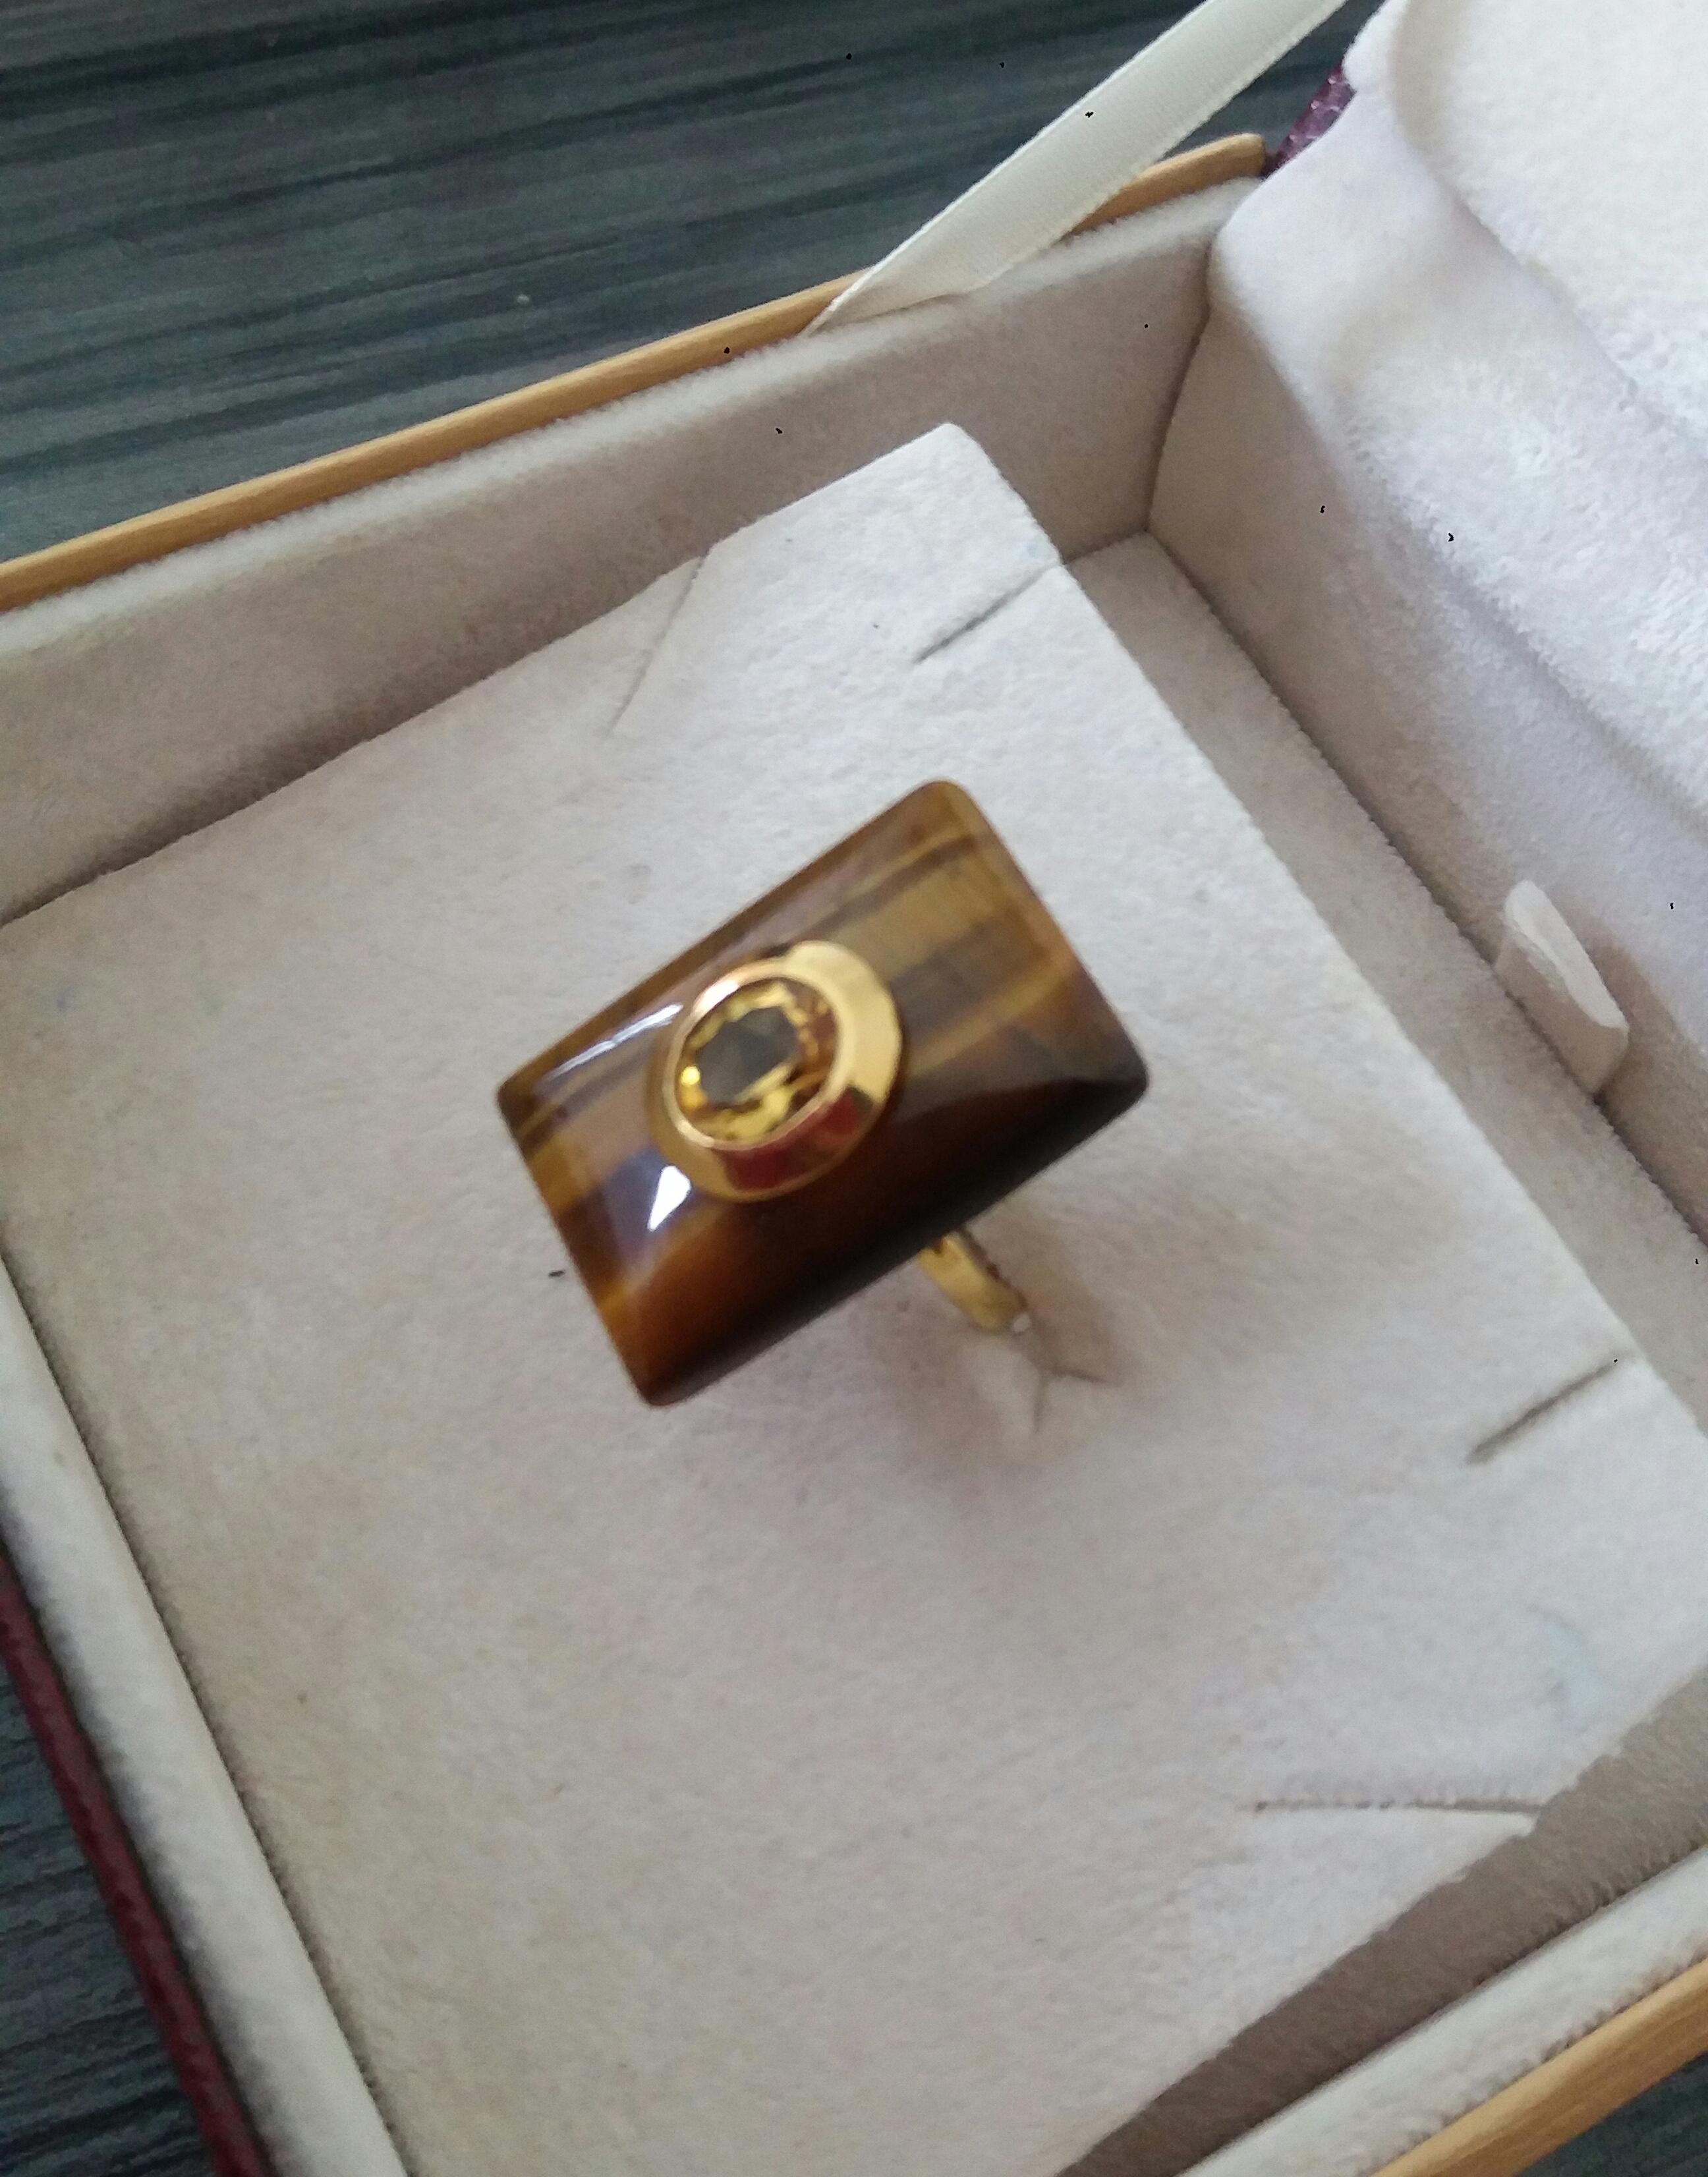 Unique ring with a Rectangular Shape Tiger Eye ,measuring 28 mm. x 20 mm x 6mm. and weighing 36 Carats with a nice Oval Faceted Yellow Citrine measuring 8 mm x 10 mm set in 14 kt yellow gold...Ring shank is also in 14 kt  solid yellow gold now in